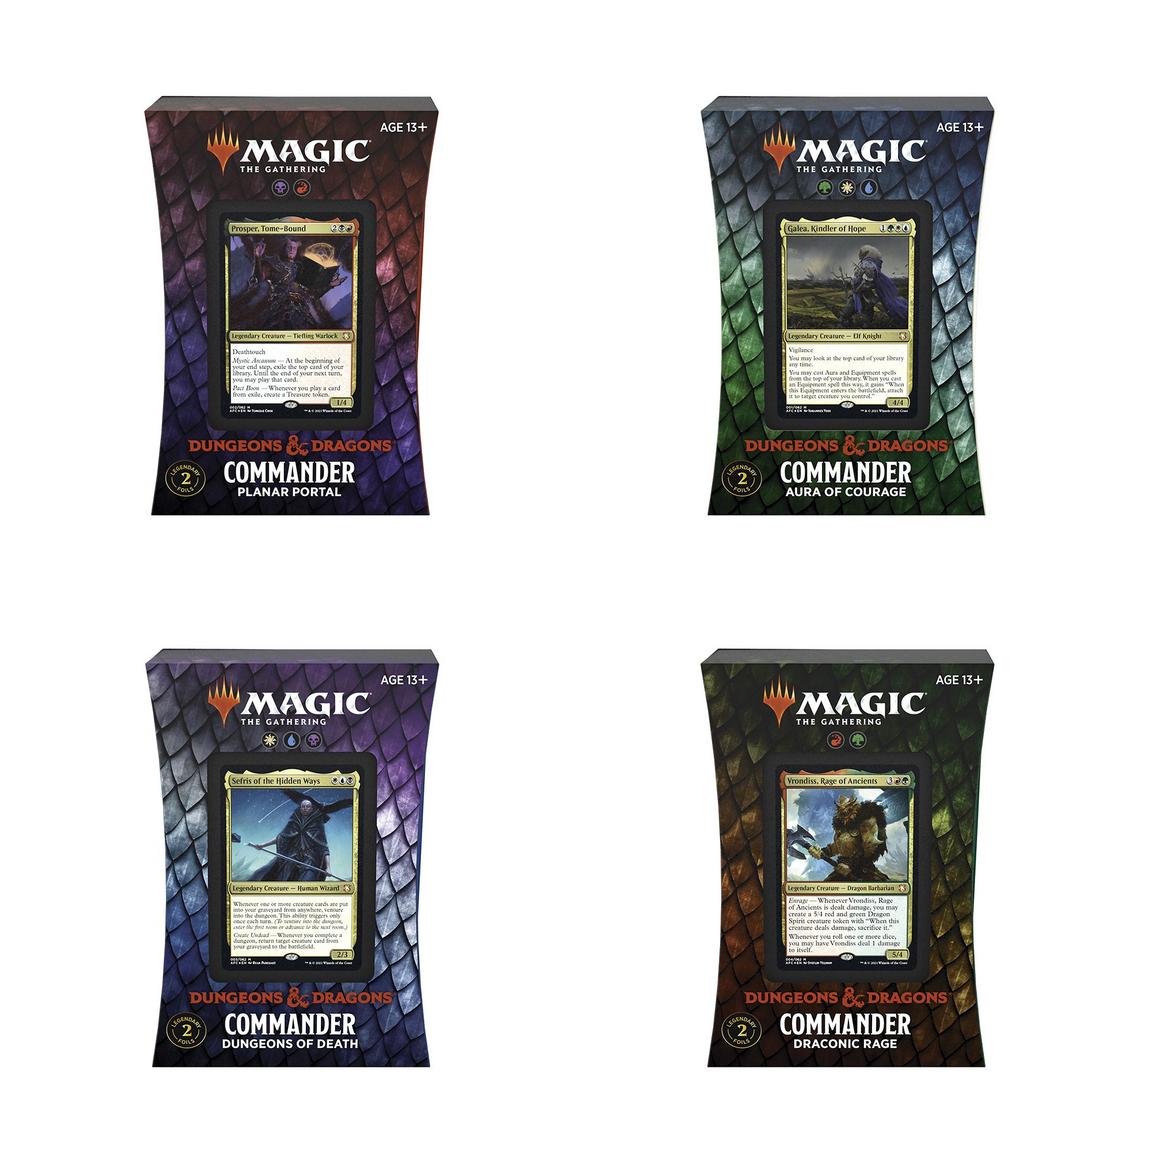 Magic: The Gathering Dungeons Forgotten Realms Commander Deck